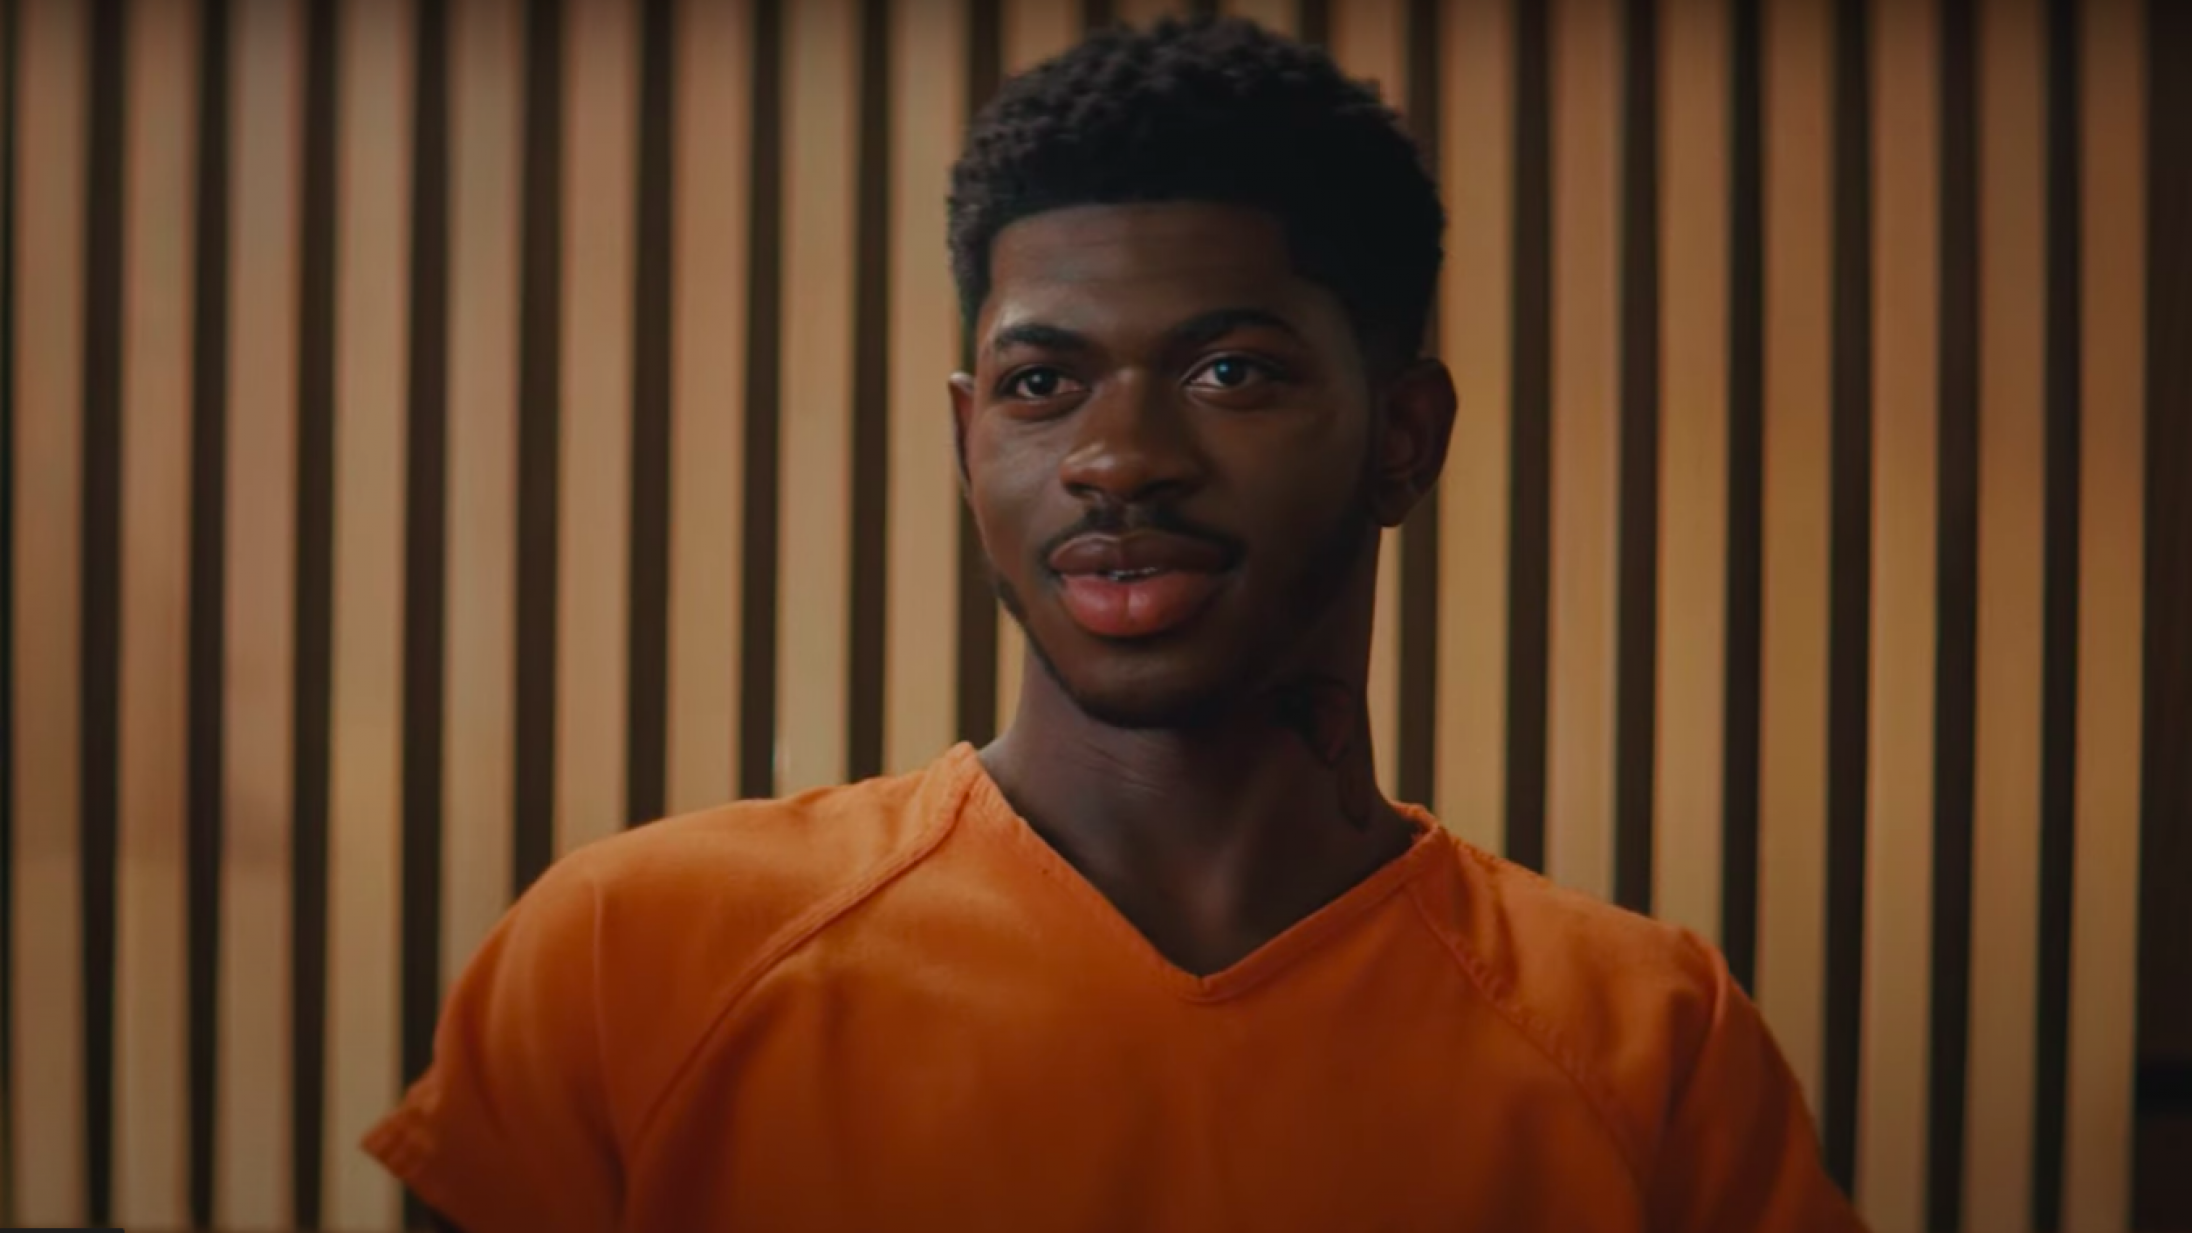 Lil Nas X giver Nike fingeren i teaservideo for ny sang, ‘Industry Baby’